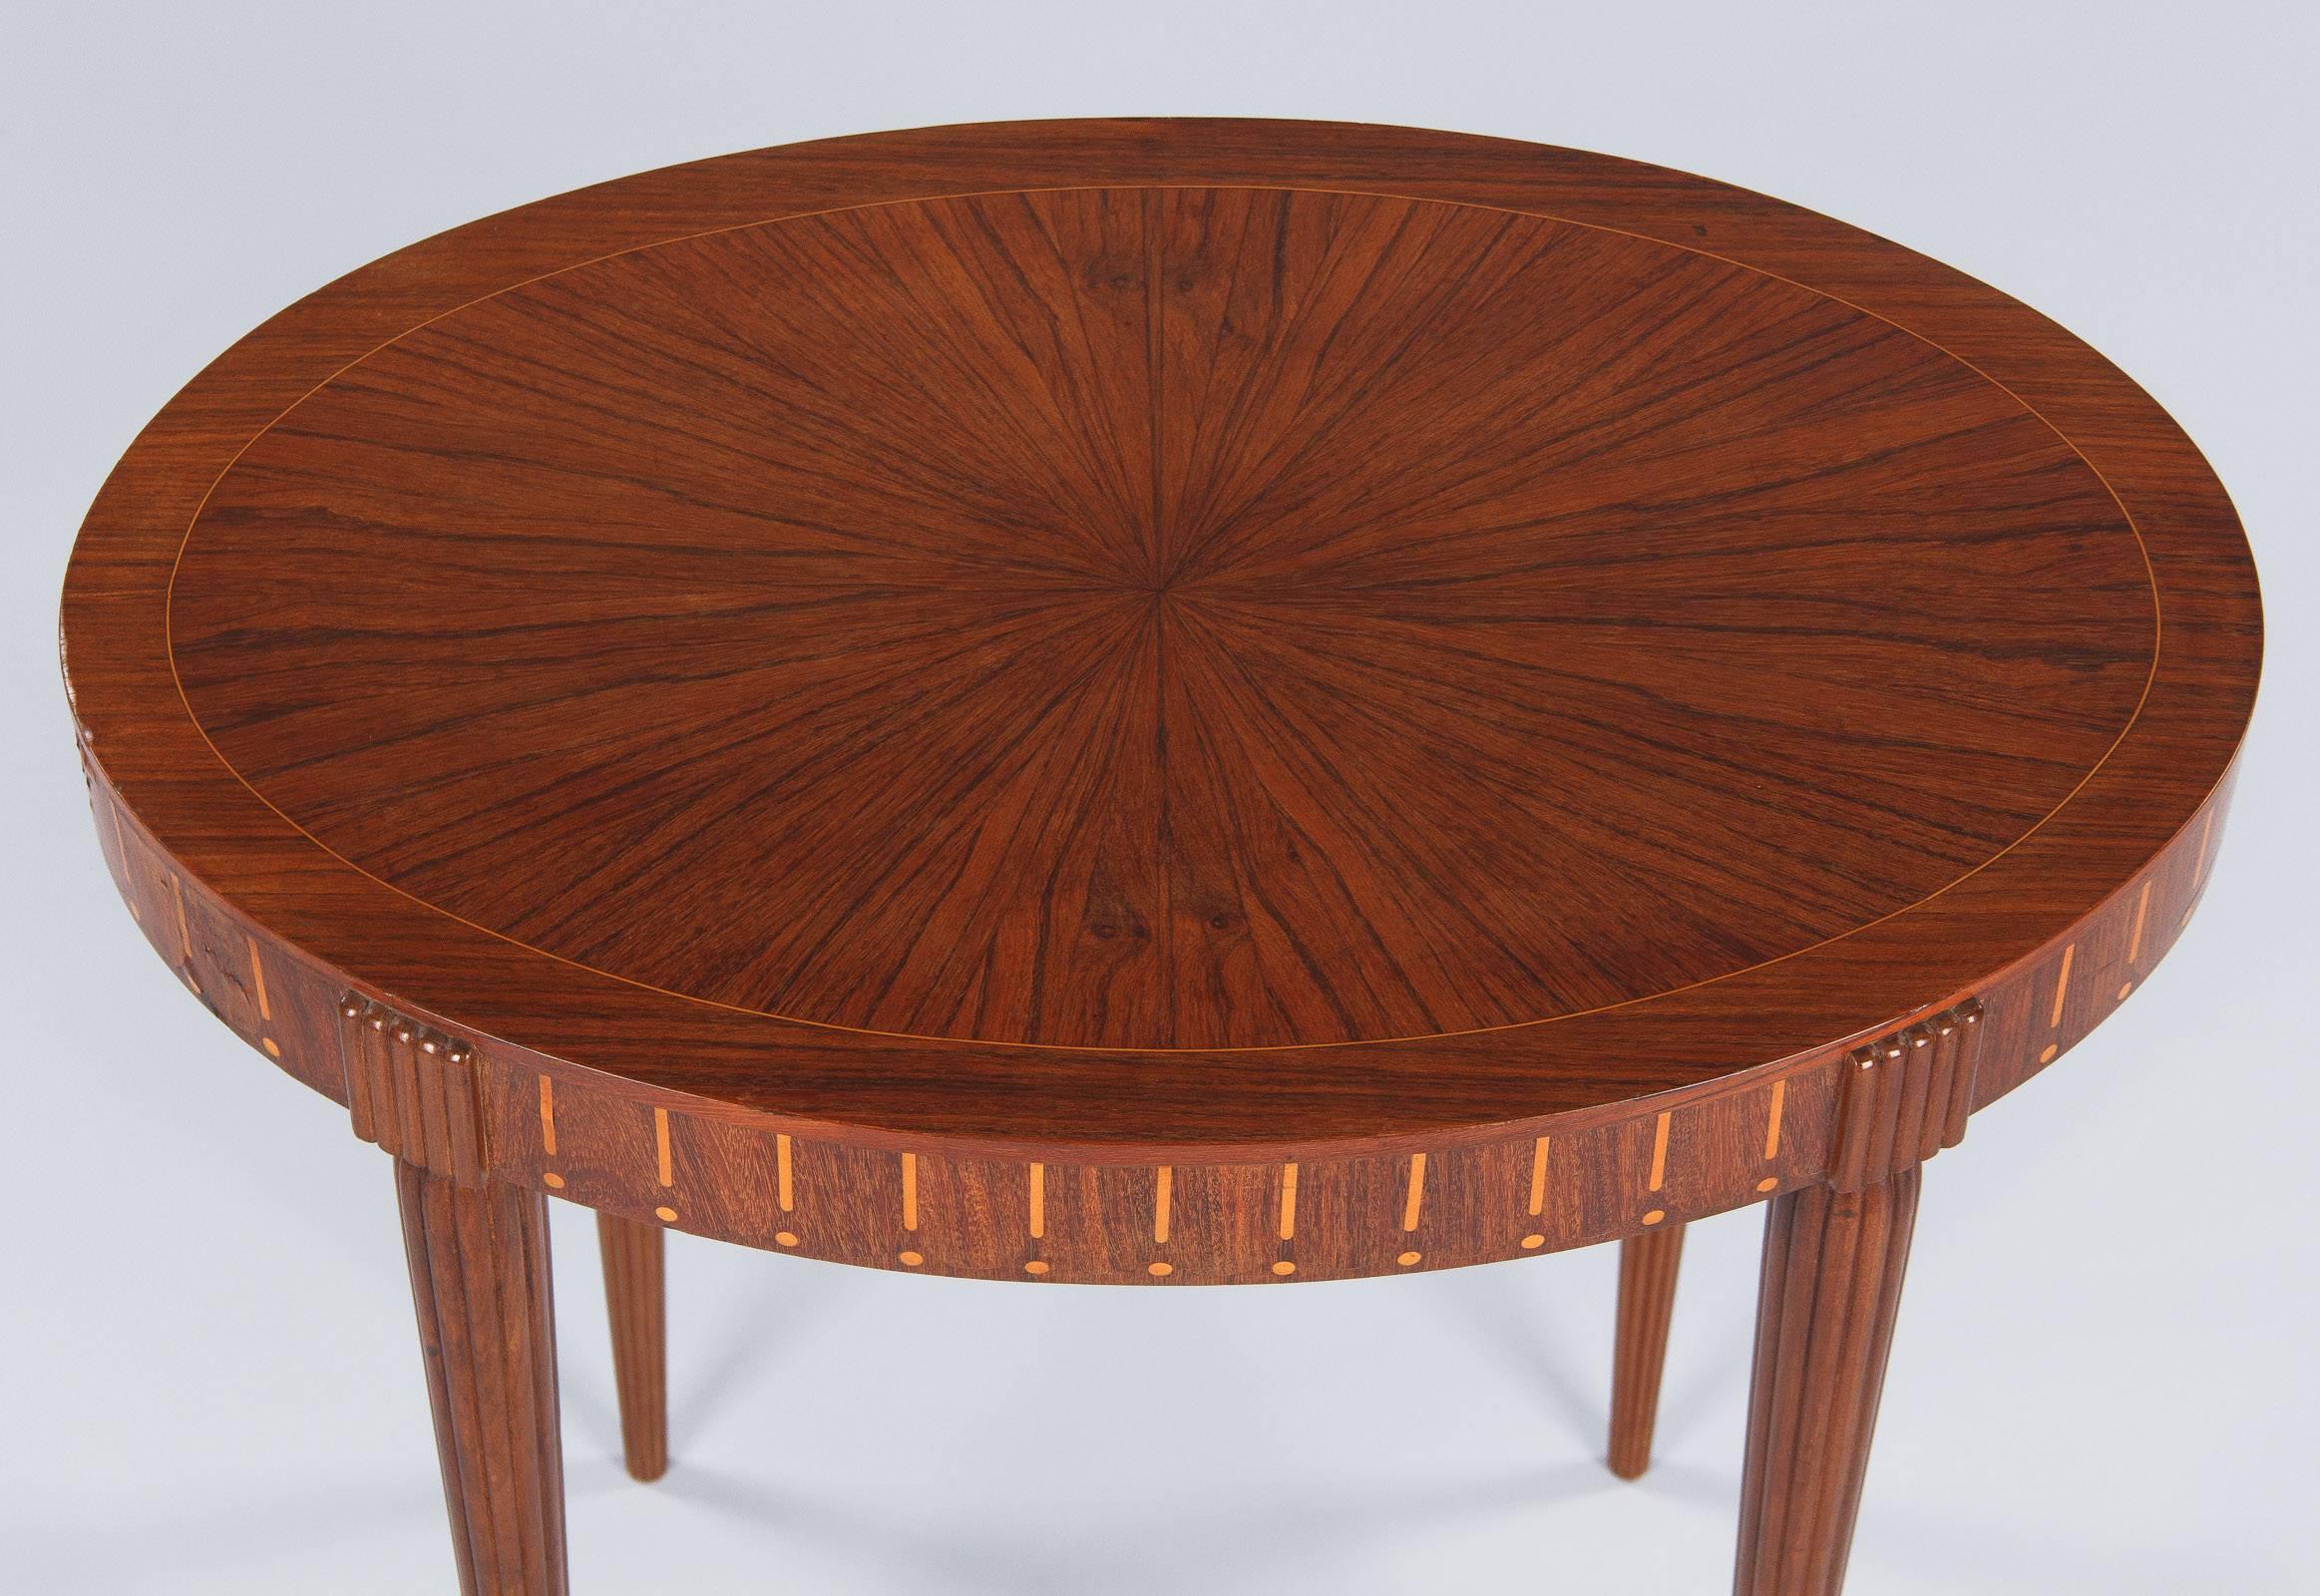 Early 20th Century French Art Deco Oval Side Table in the Style of Ruhlman